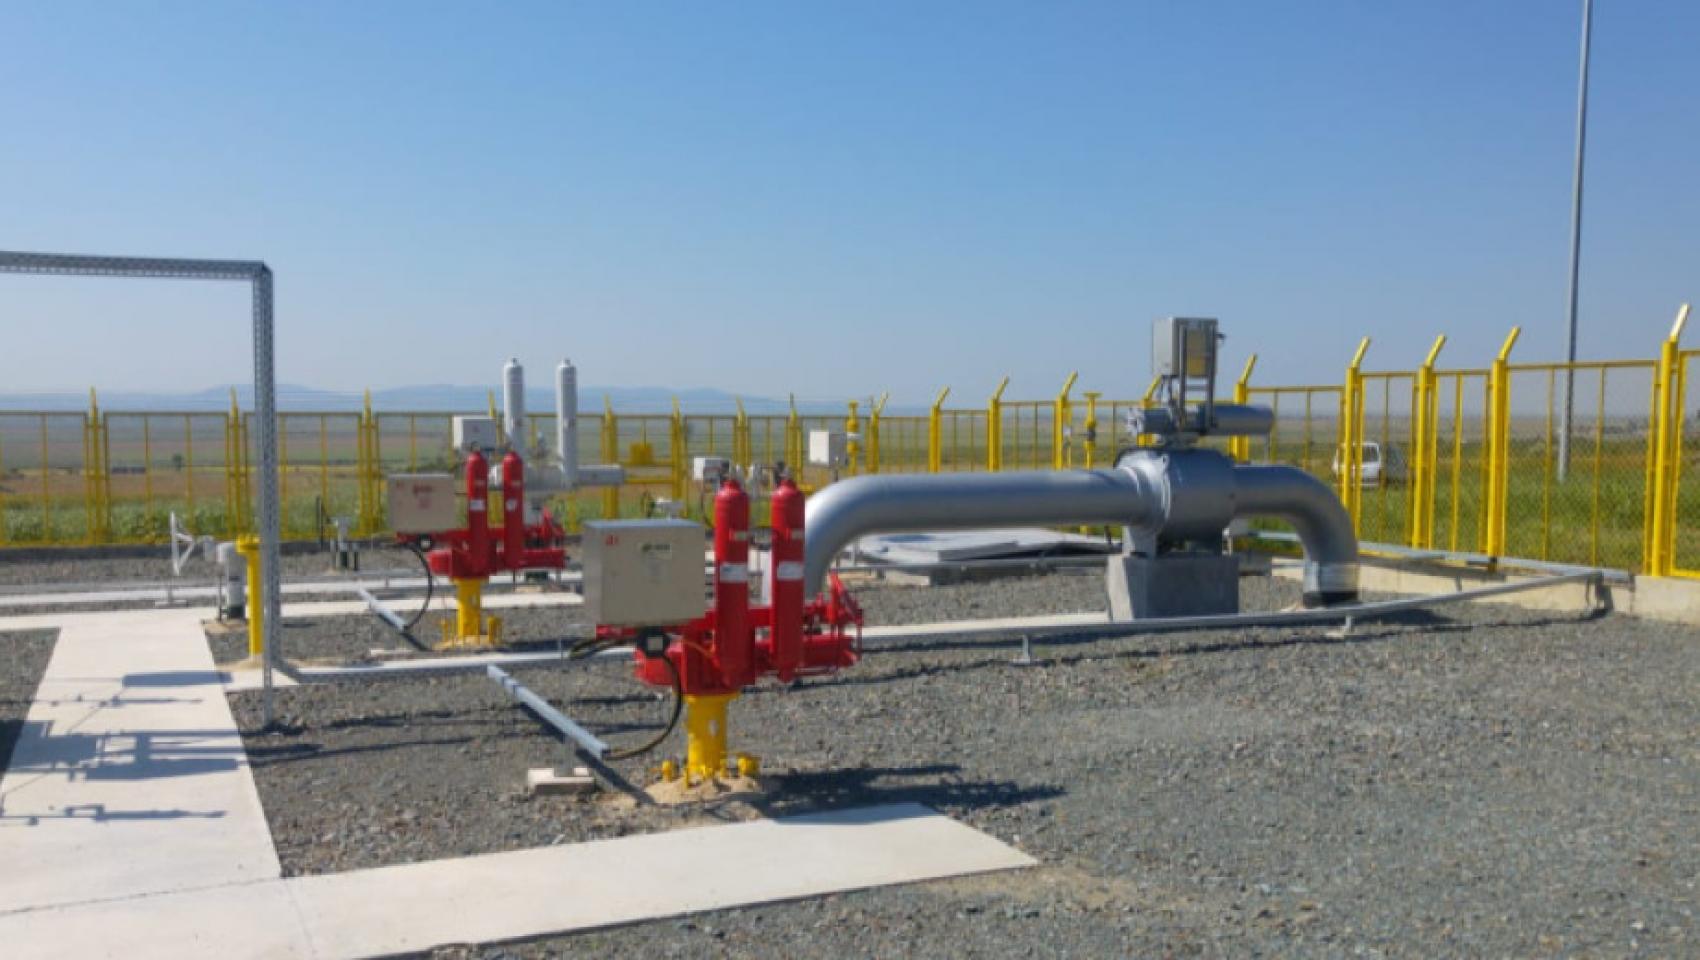 The gas distribution company Overgaz Networks is considering options in